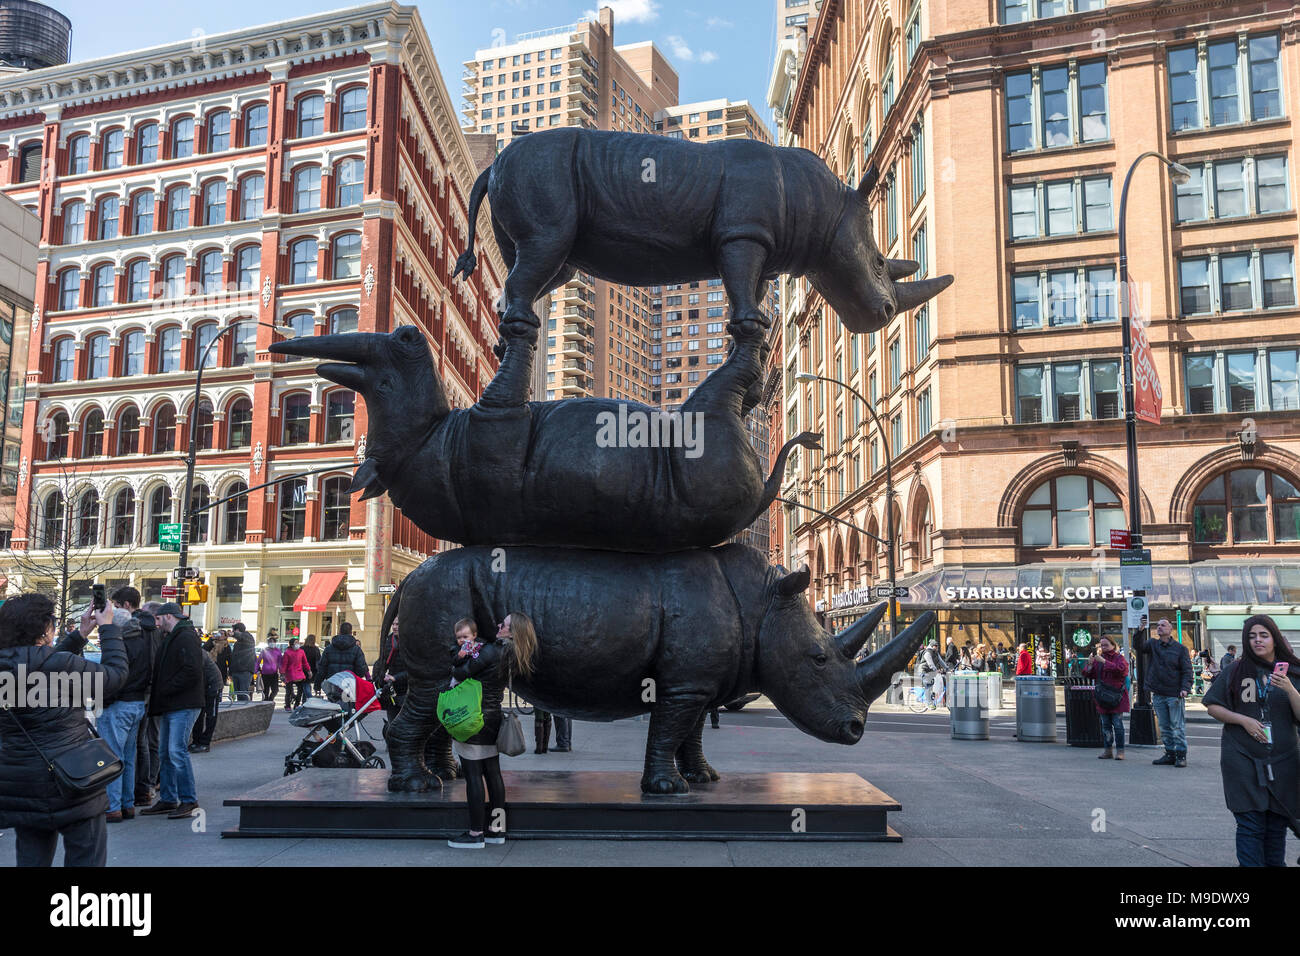 New York, NY, USA 24 March 2018 - New Yorkers flock to see a massive sculpture of three northern white rhinos in Astor Place entitled 'Goodbye Rhinos - The Last Three' It represents Sudan, Najin and Fatu.  the last living animals of a species that is now extinct in the wild. Stock Photo